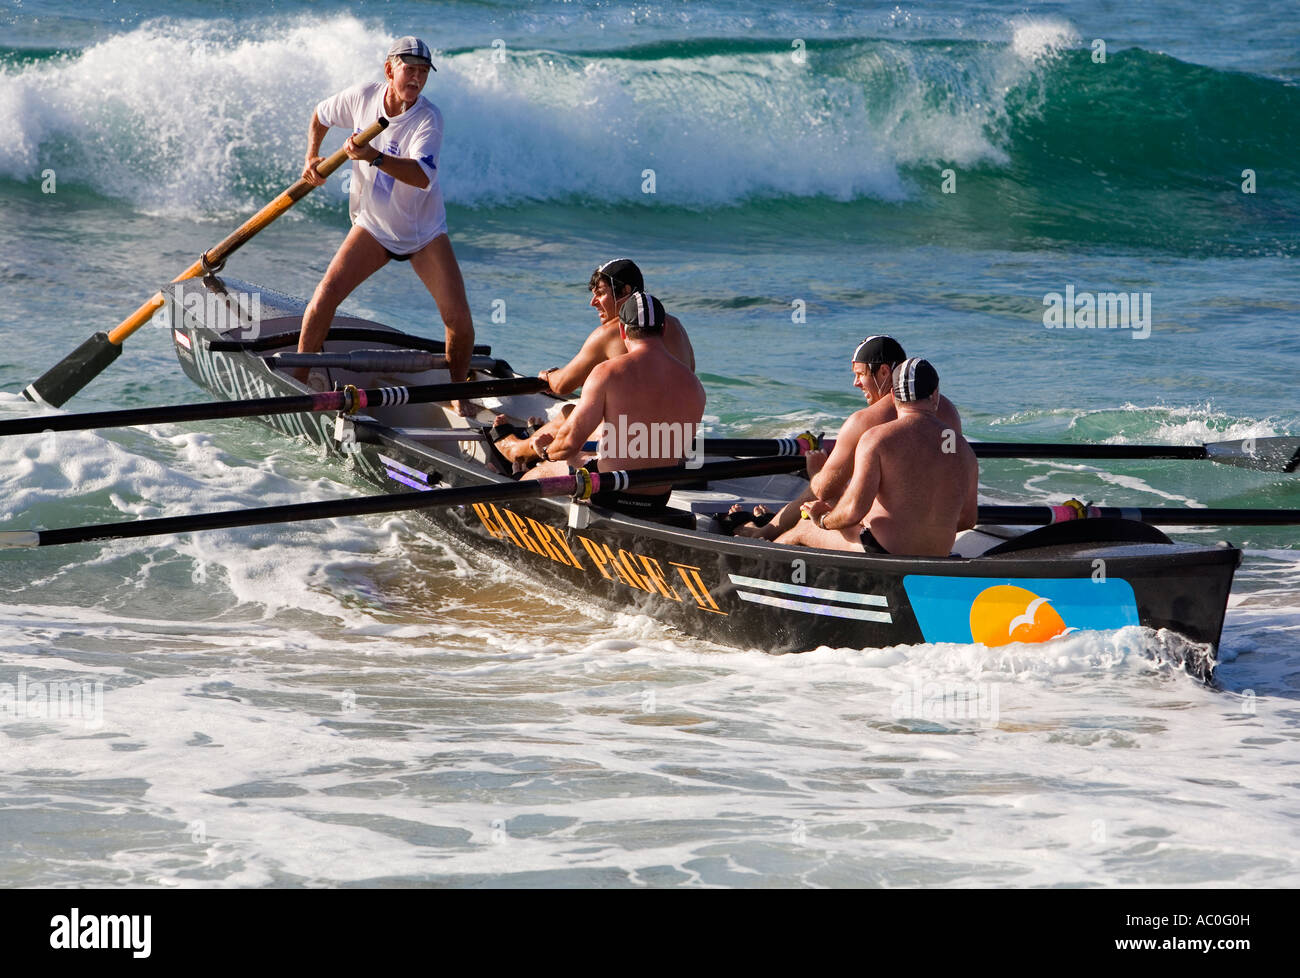 A surfboat crew battles through the waves at Cronulla Beach in Sydney Stock Photo